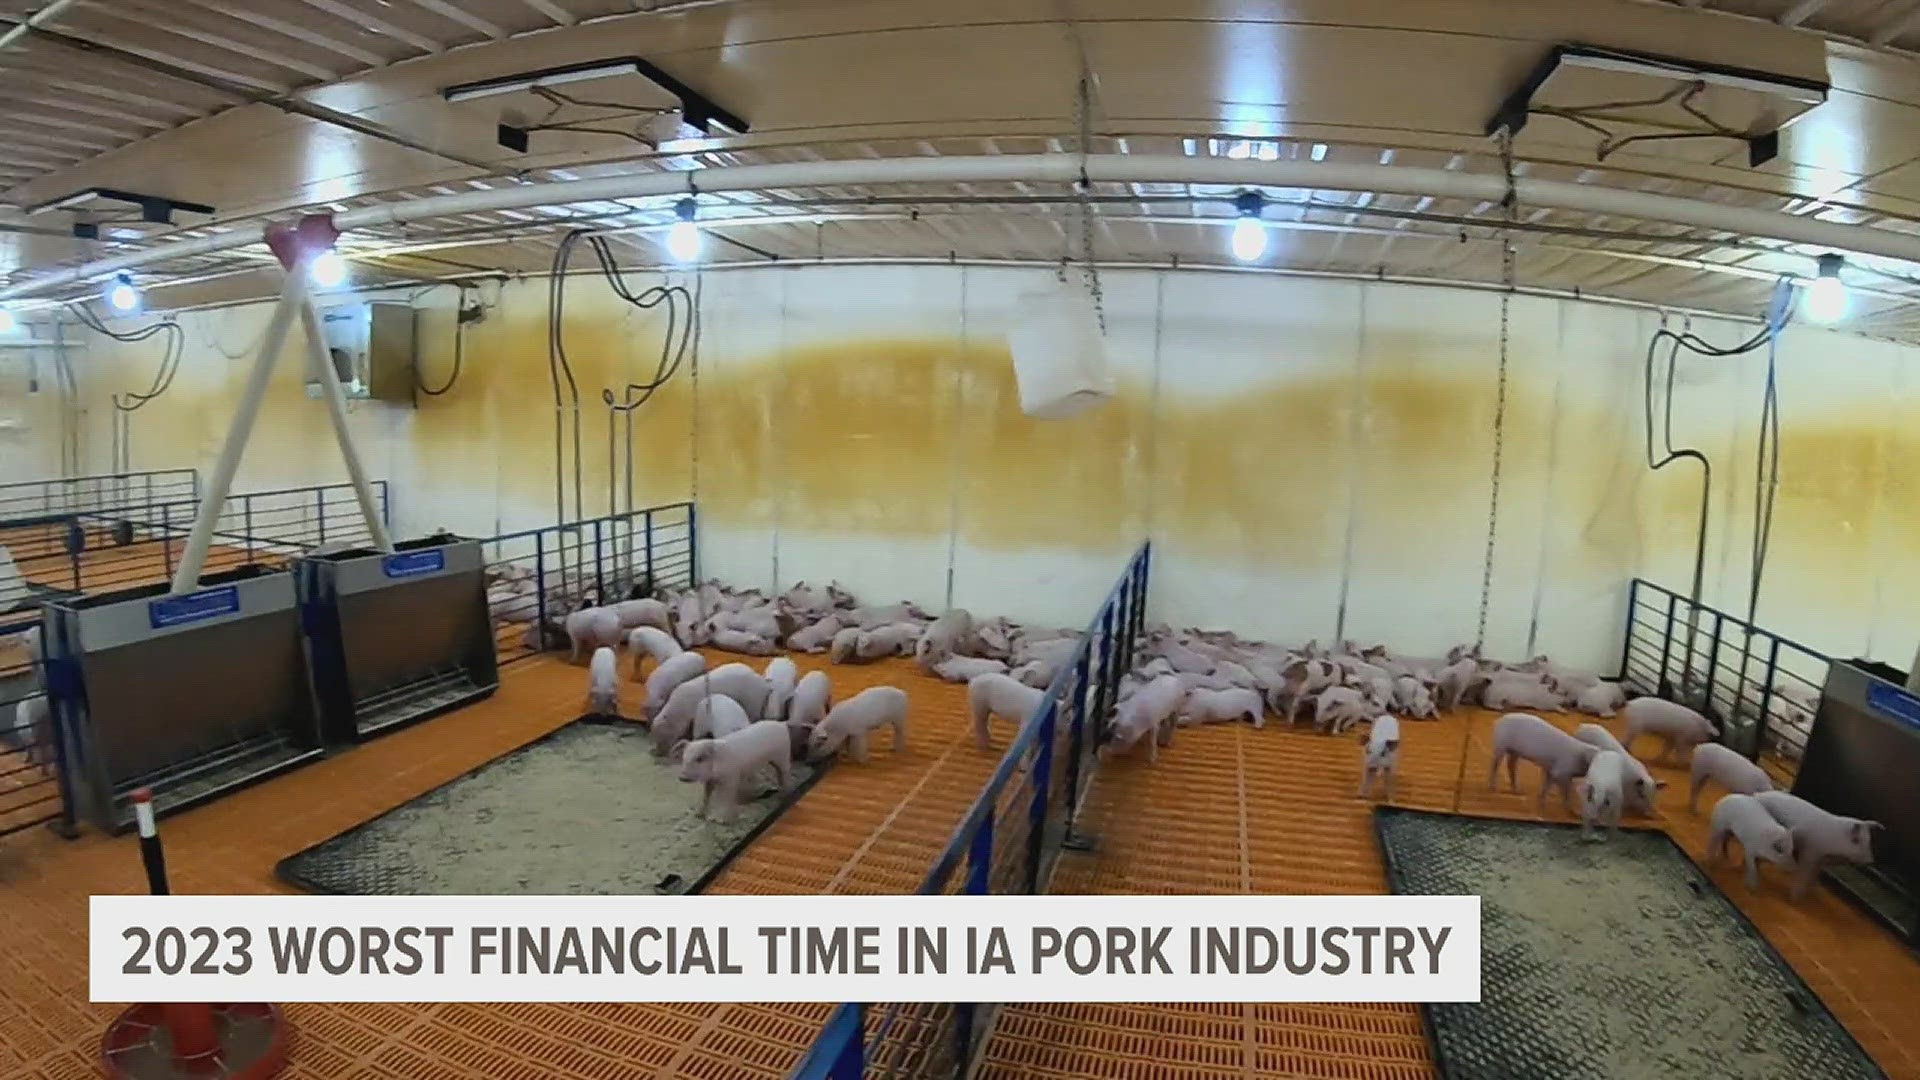 On average, Iowa pork producers lost $32 dollars per hog last year. That's $5 more in losses compared to 1998, the previous worst year on record.